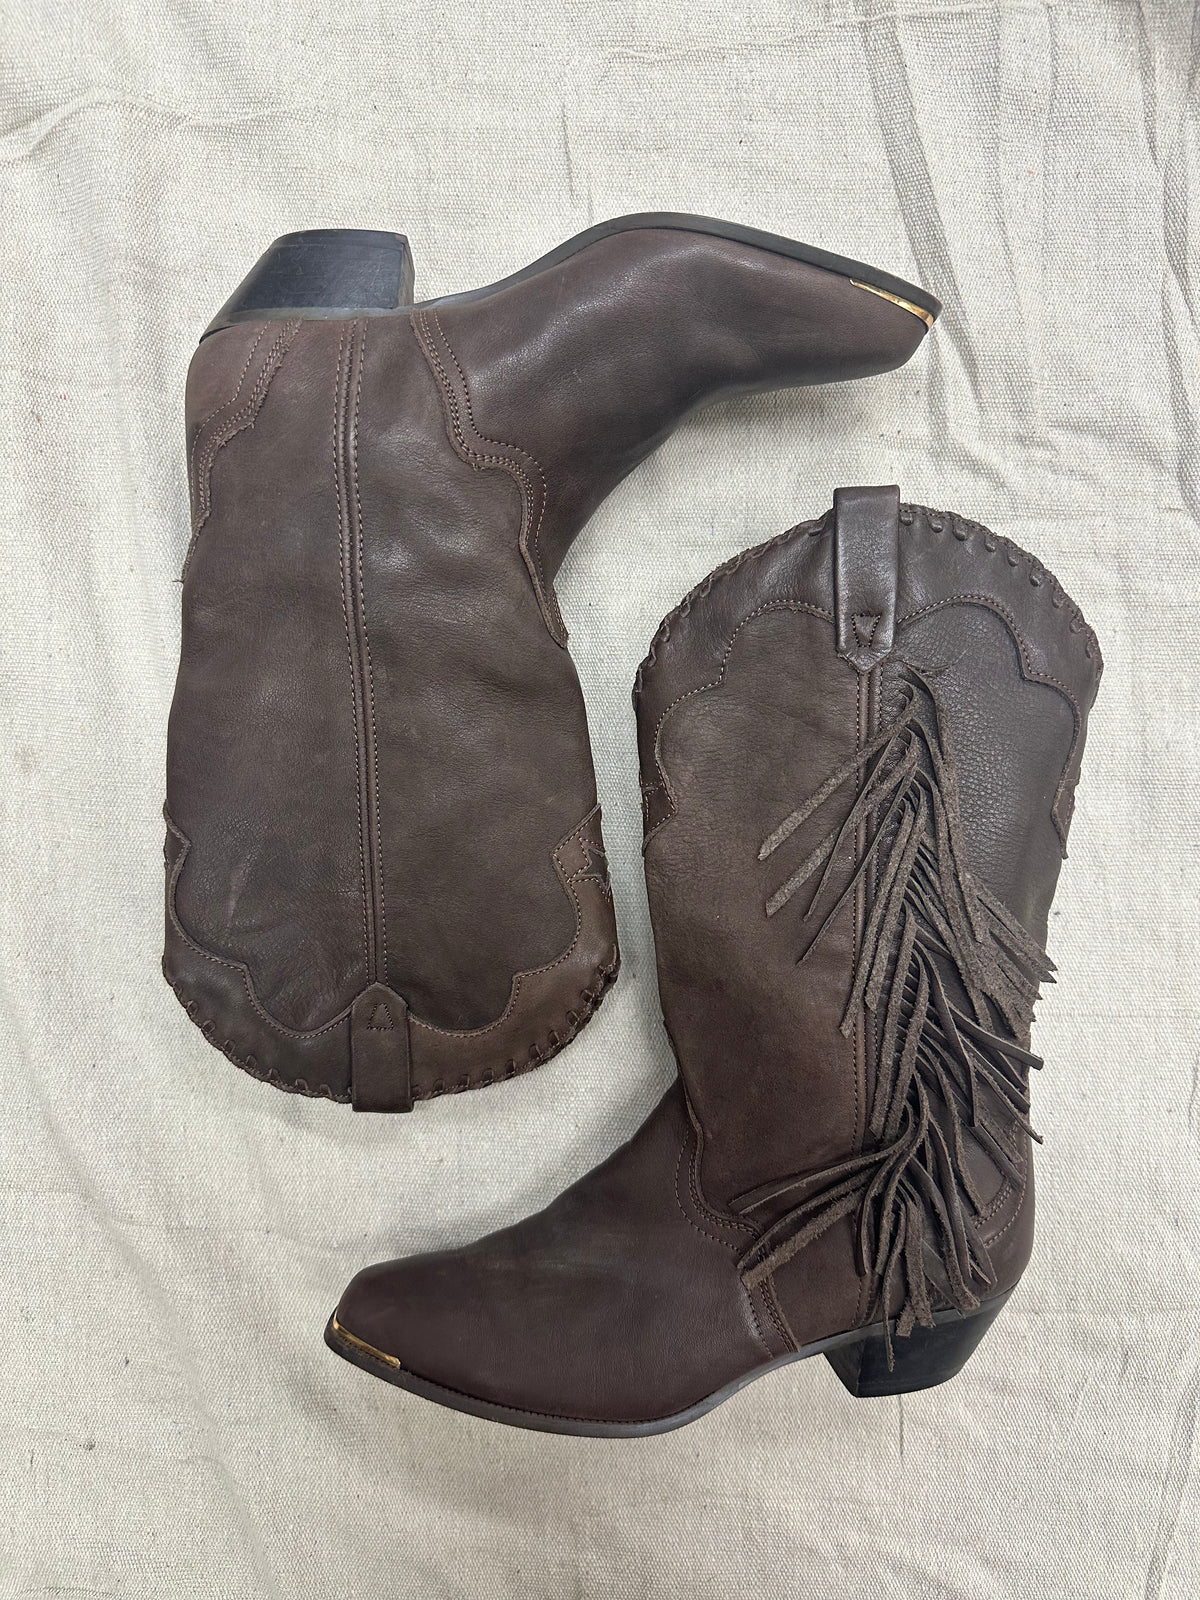 Brown Fringe With Gold Toe Cap Cowboy Boots